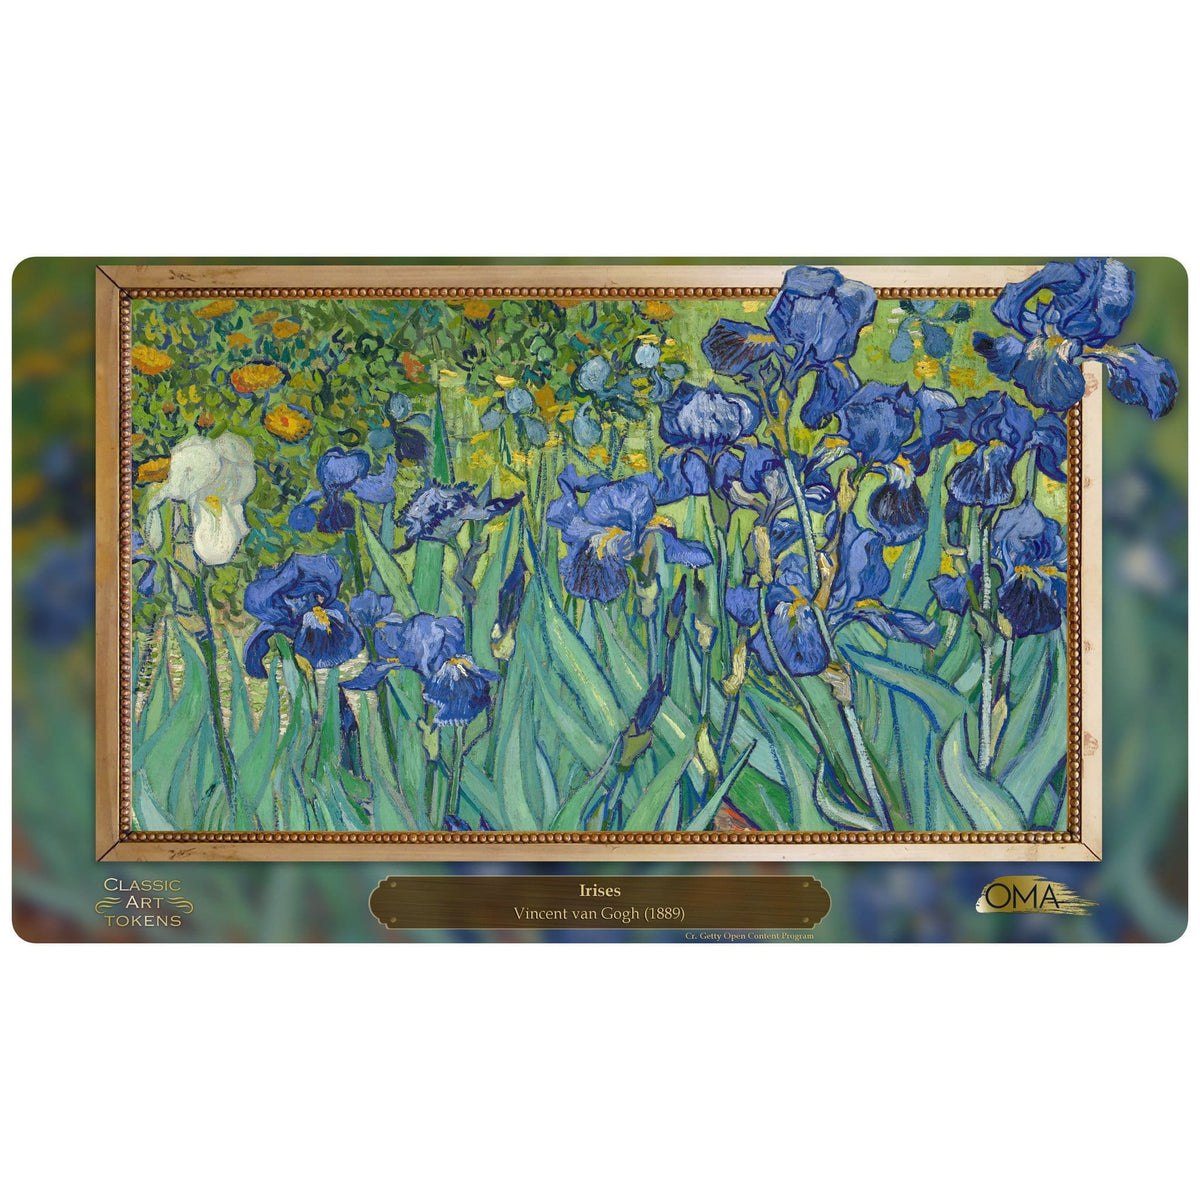 Plant Playmat by Vincent van Gogh - Playmat - Original Magic Art - Accessories for Magic the Gathering and other card games